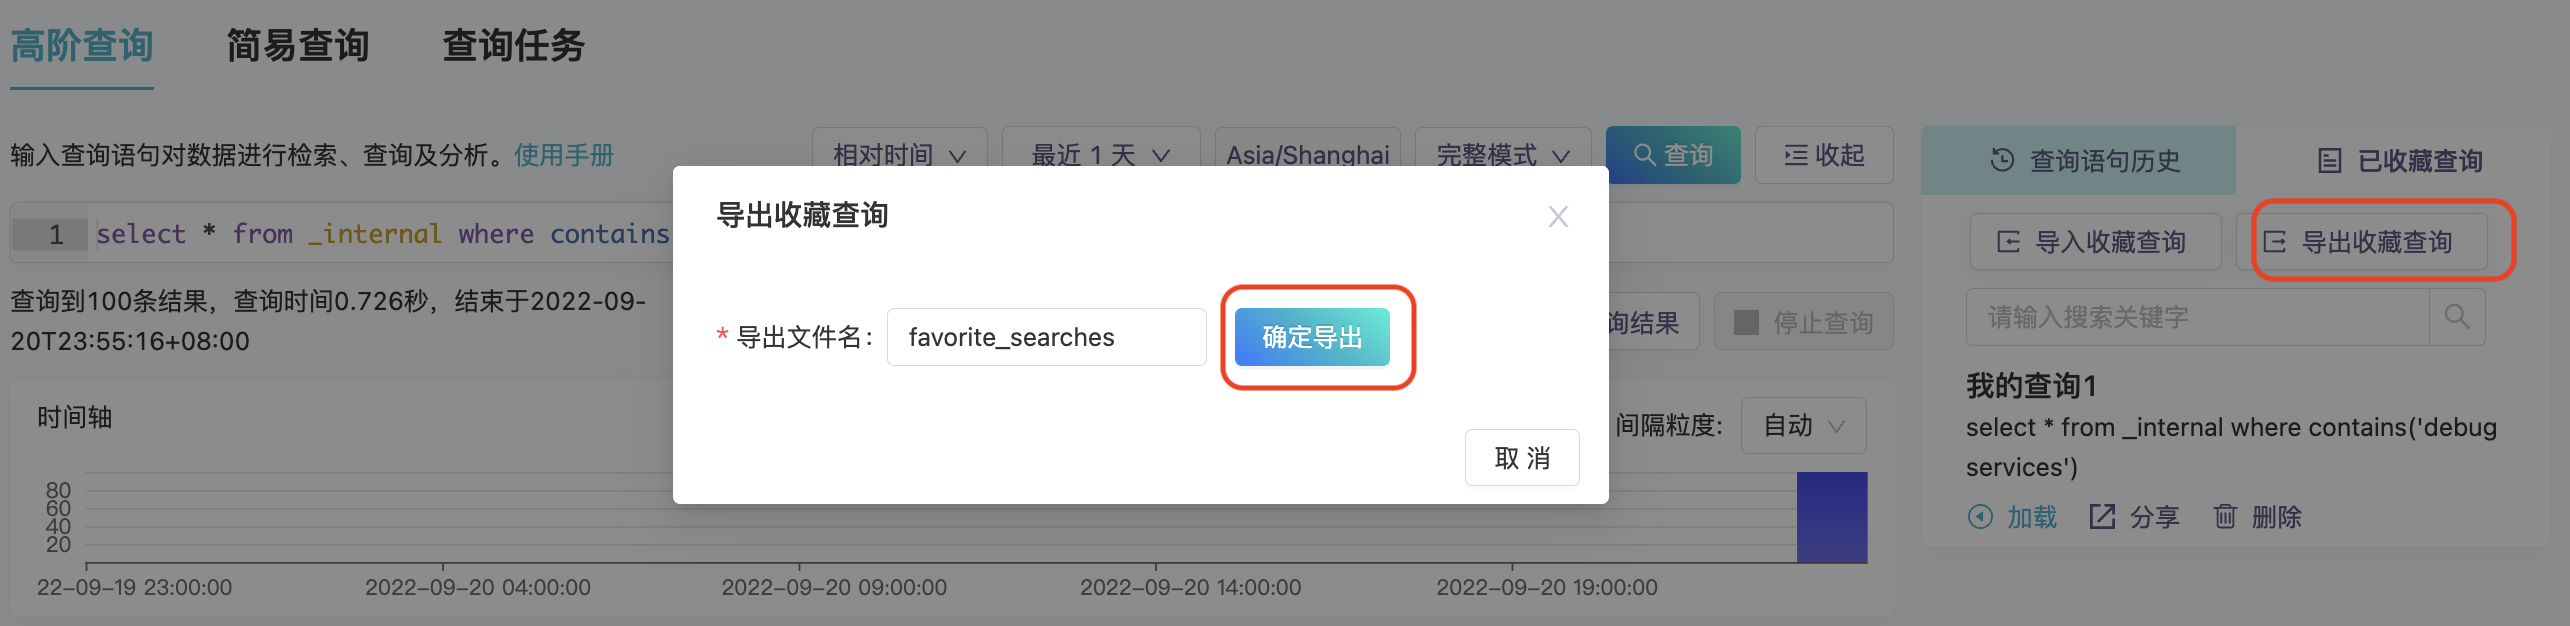 search_favorite_search_export